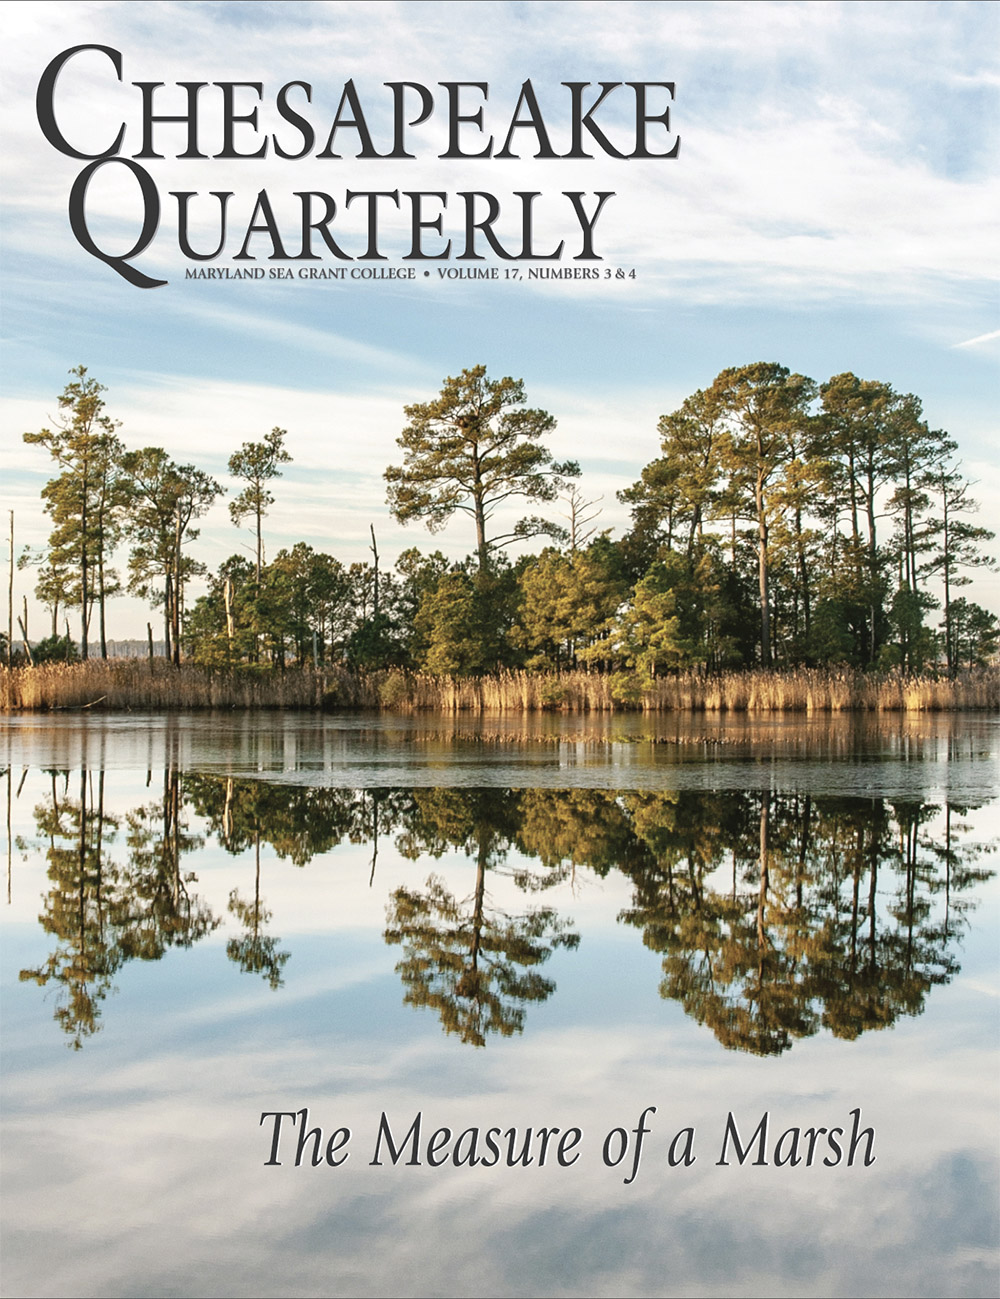 Volume 17, Numbers 3 & 4 : The Measure of a Marsh